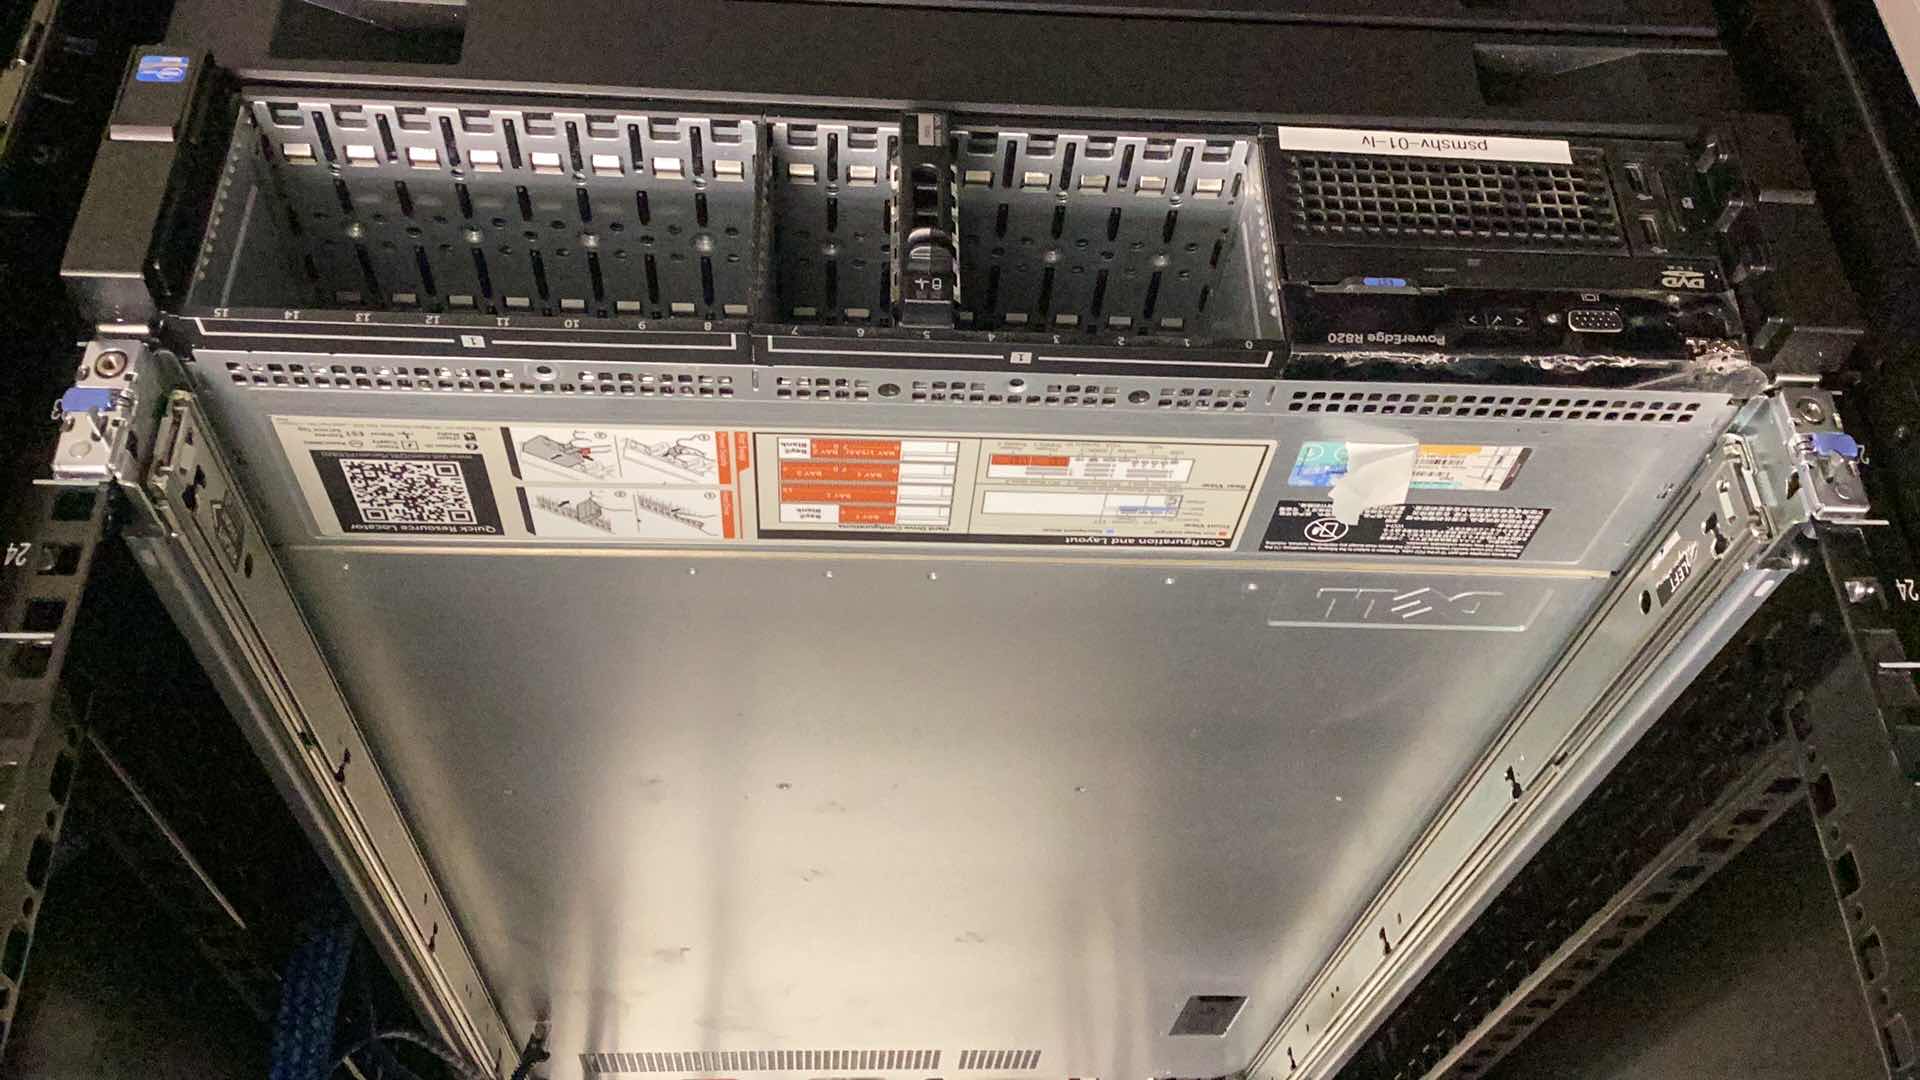 Photo 1 of DELL POWEREDGE R820 WITH WINDOWS SERVER COA (BUYER TO DISASSEMBLE & REMOVE FROM 2ND STORY OFFICE BUILDING W ELEVATOR)